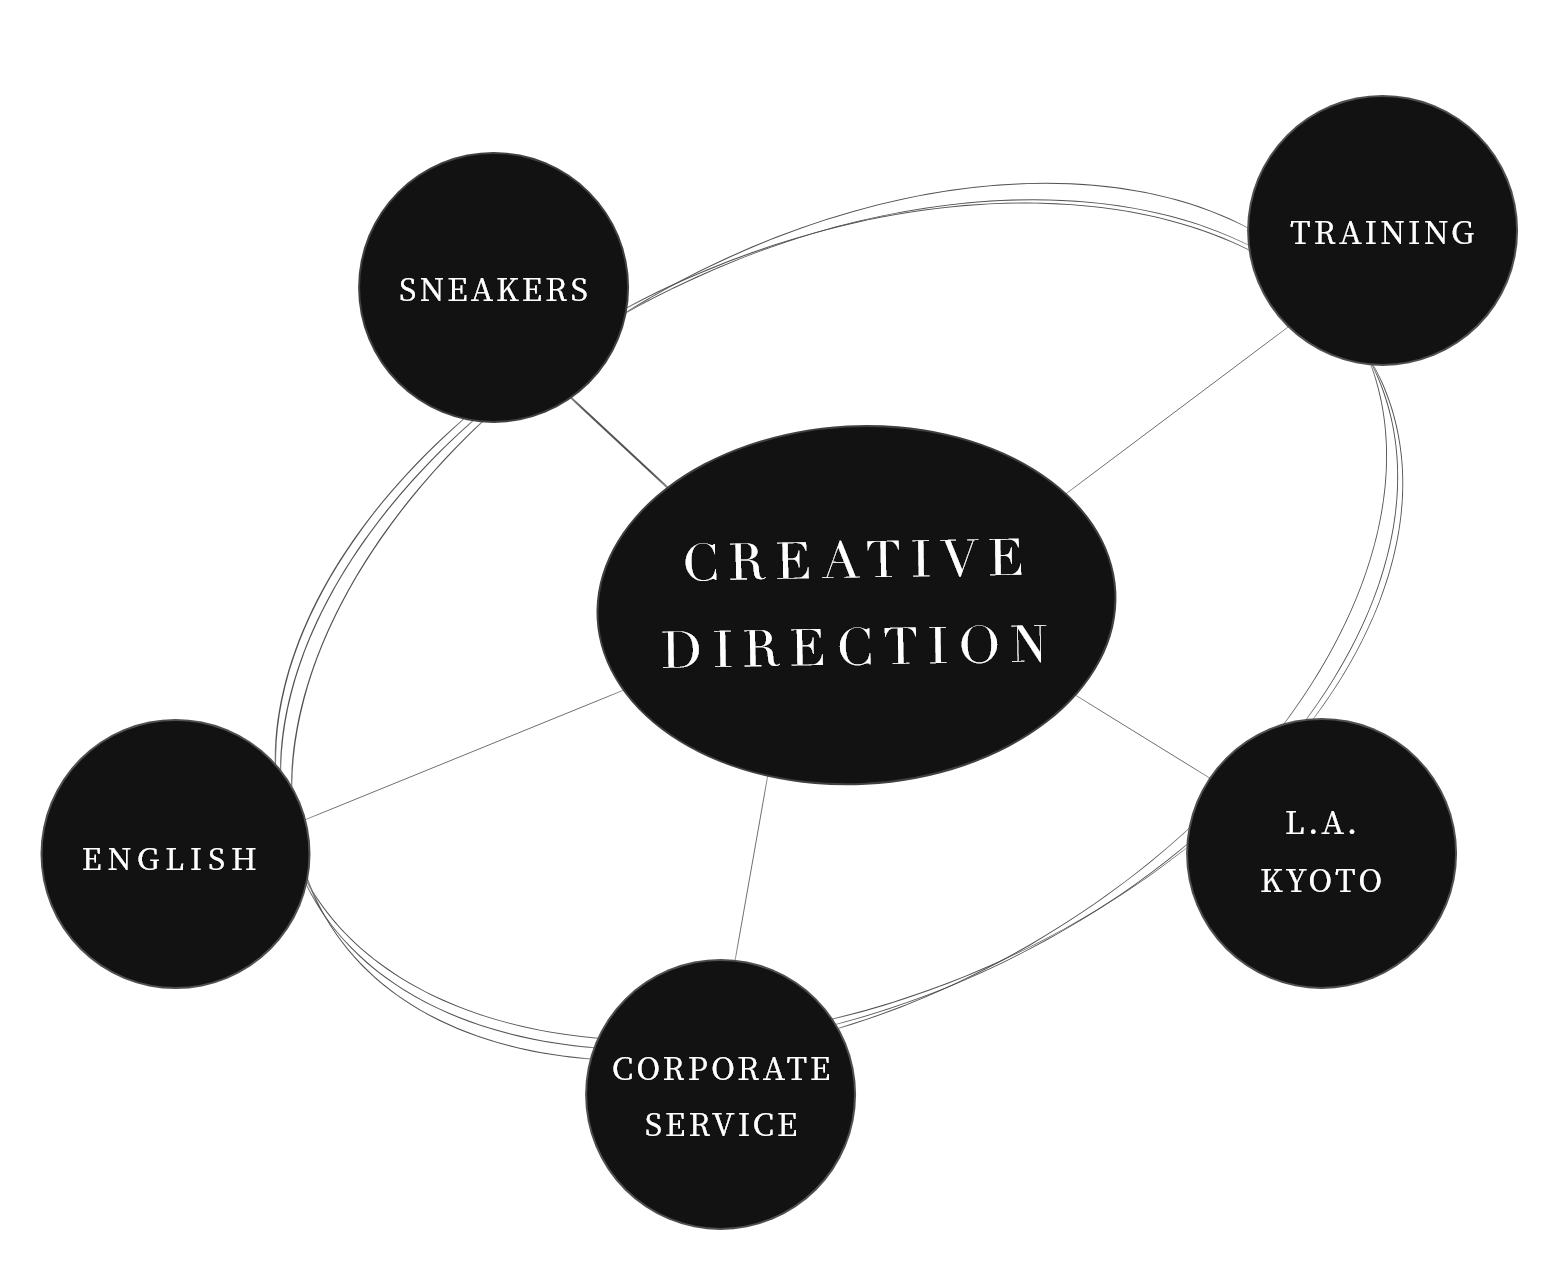 CREATIVE DIRECTION SNEAKERS ENGLISH CORPORATE-SERVICE L.A. TRAINING